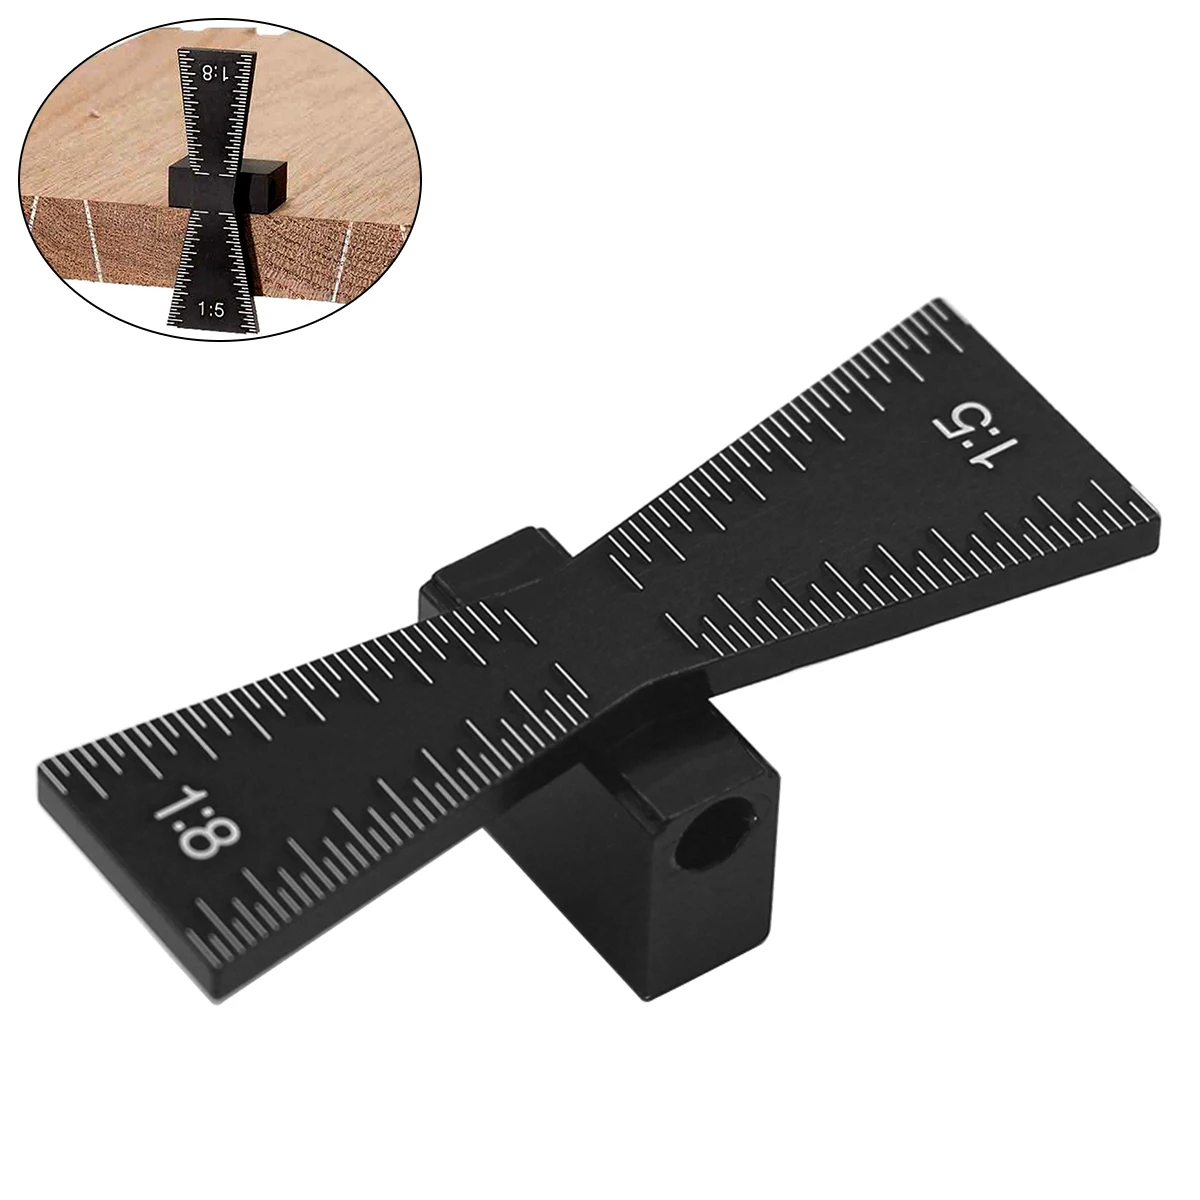 

Dovetail Marker Aluminum Alloy Dovetail Line Locator Marking Template 1:5 & 1:8 Wood Joint Gauge With Scale Dovetail Guide Tool